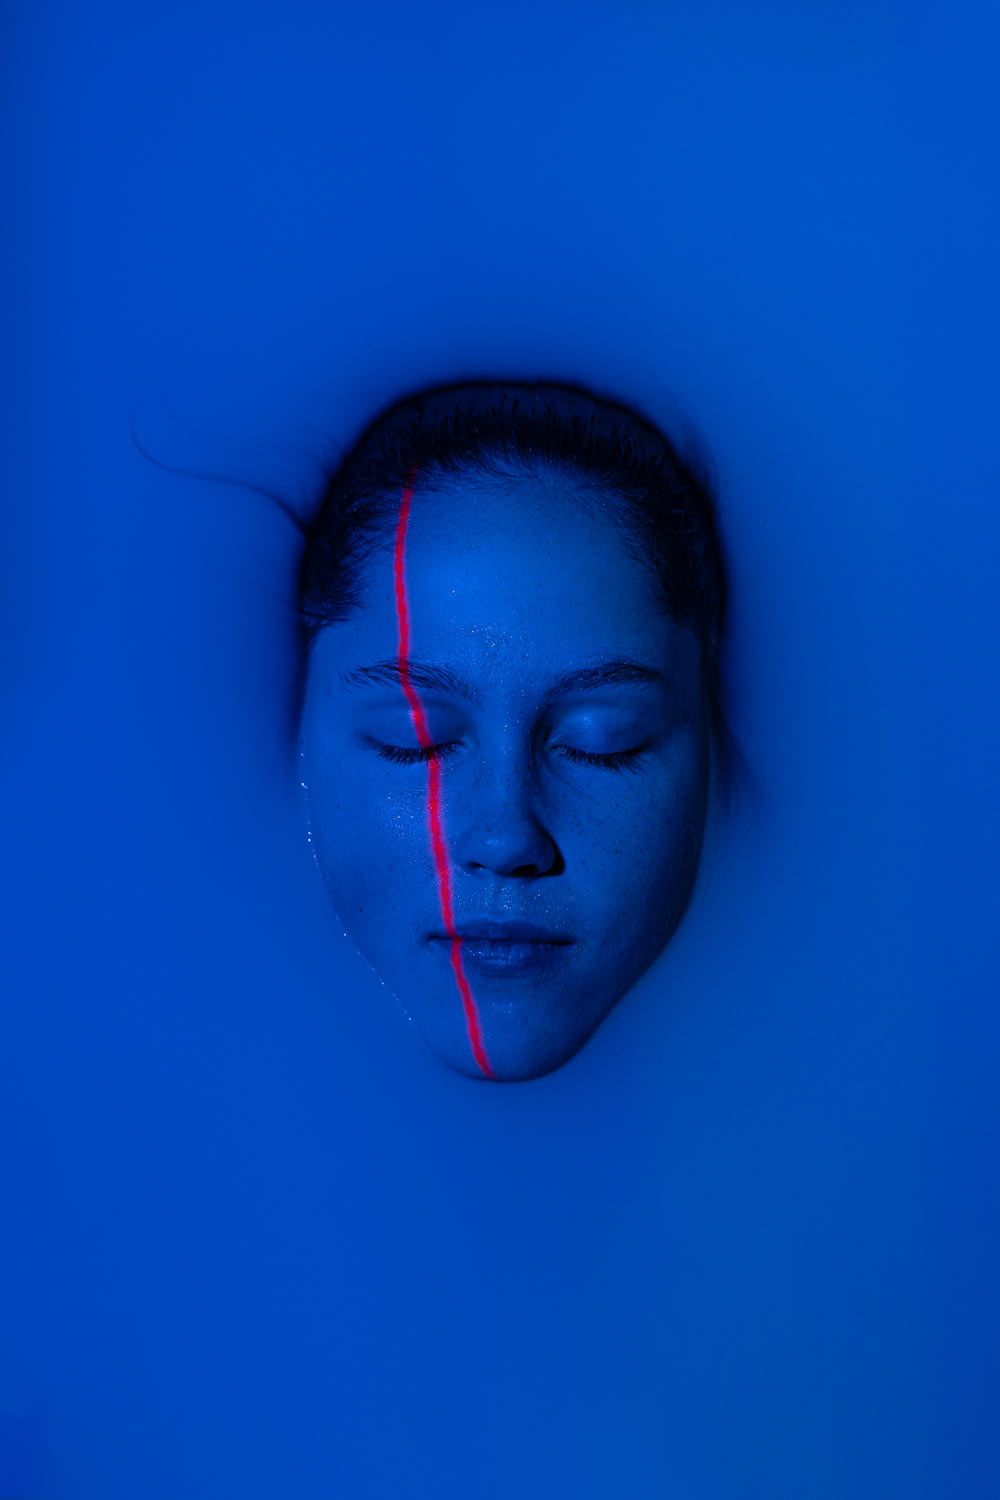 a woman with her eyes closed in a blue room